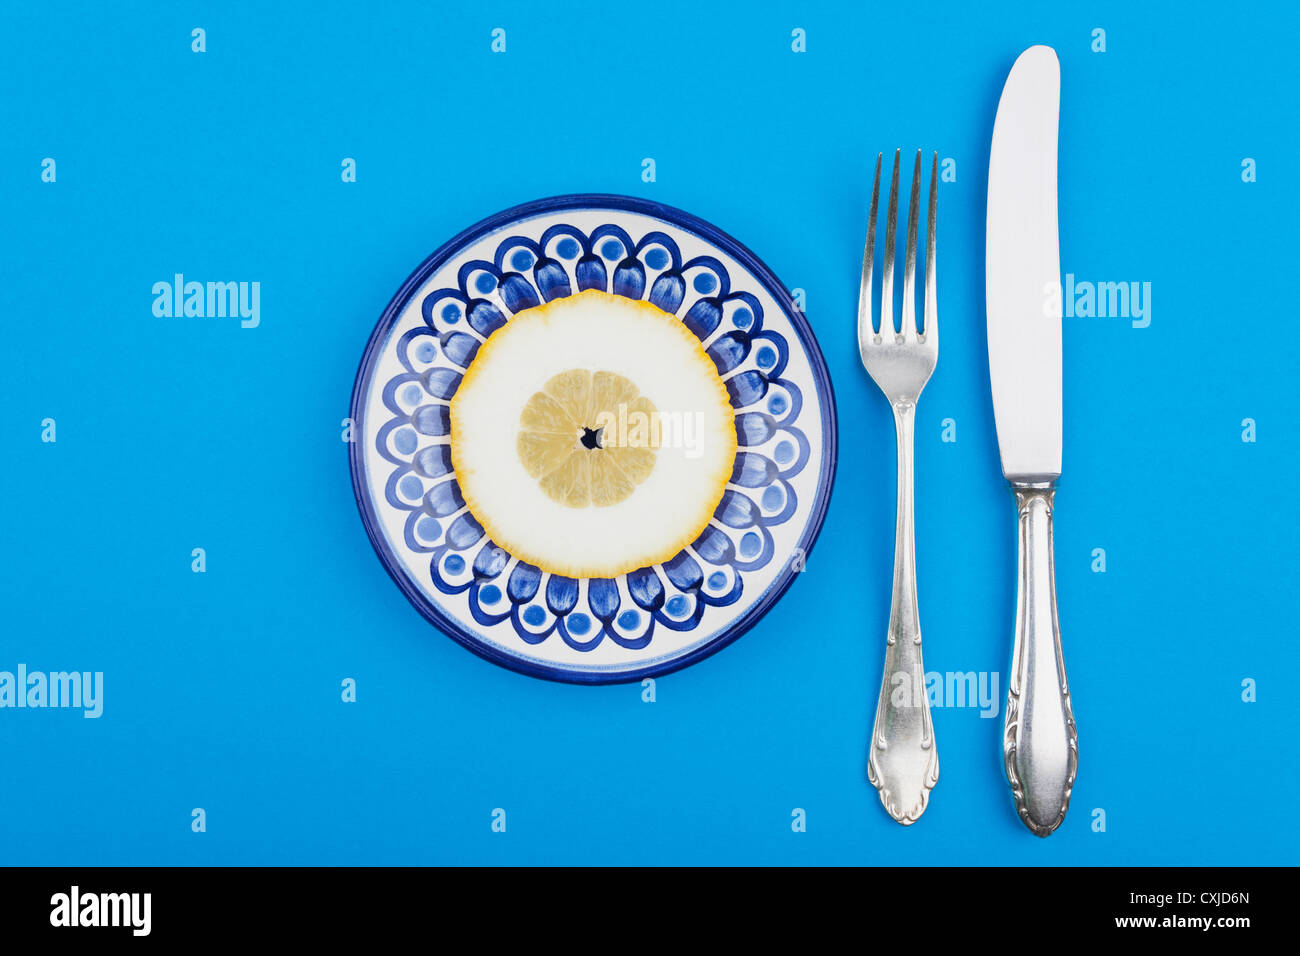 Lemon slice on plate with fork and knife Stock Photo